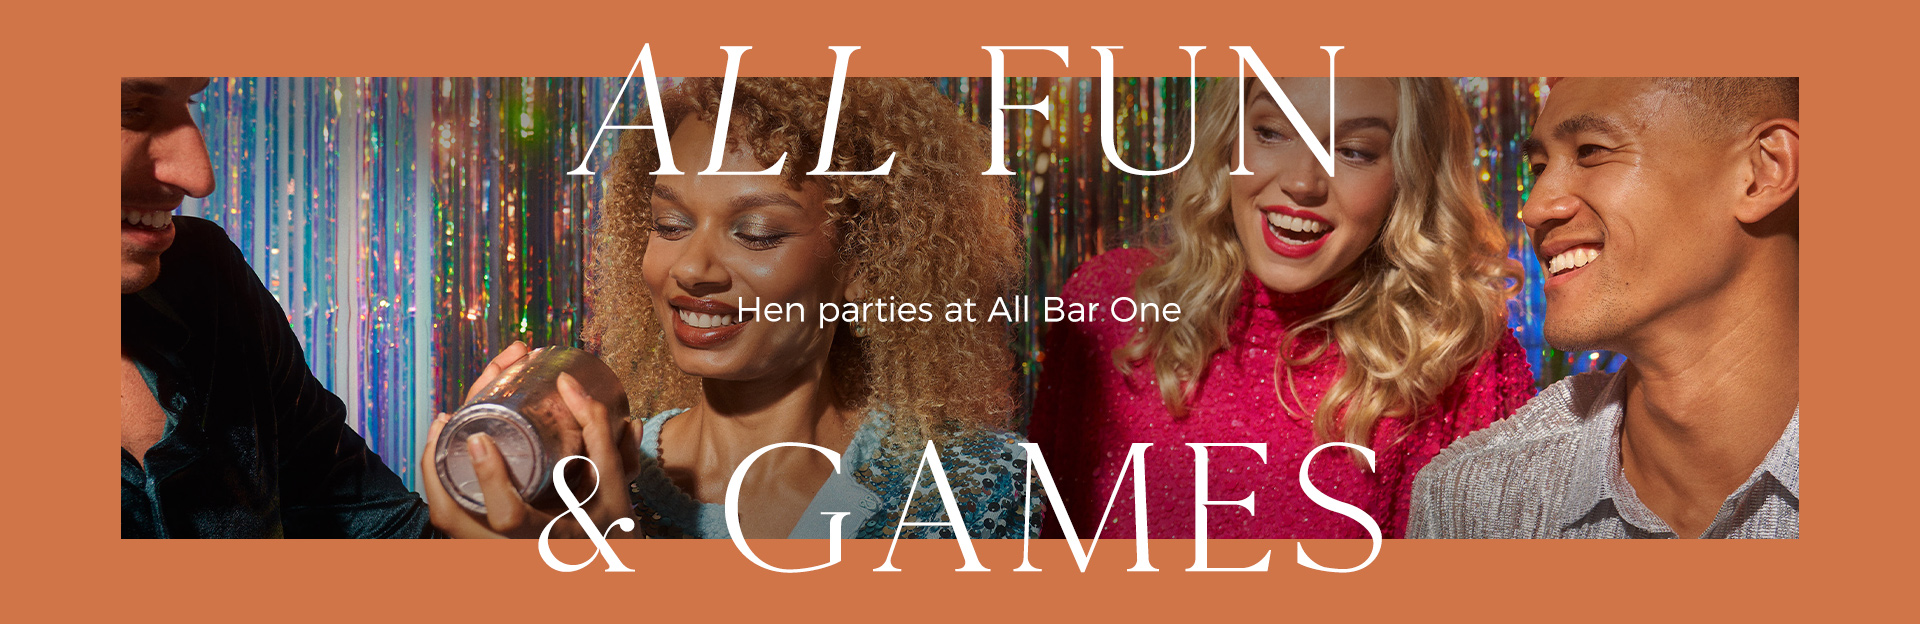 Hen parties at All Bar One Picton Place